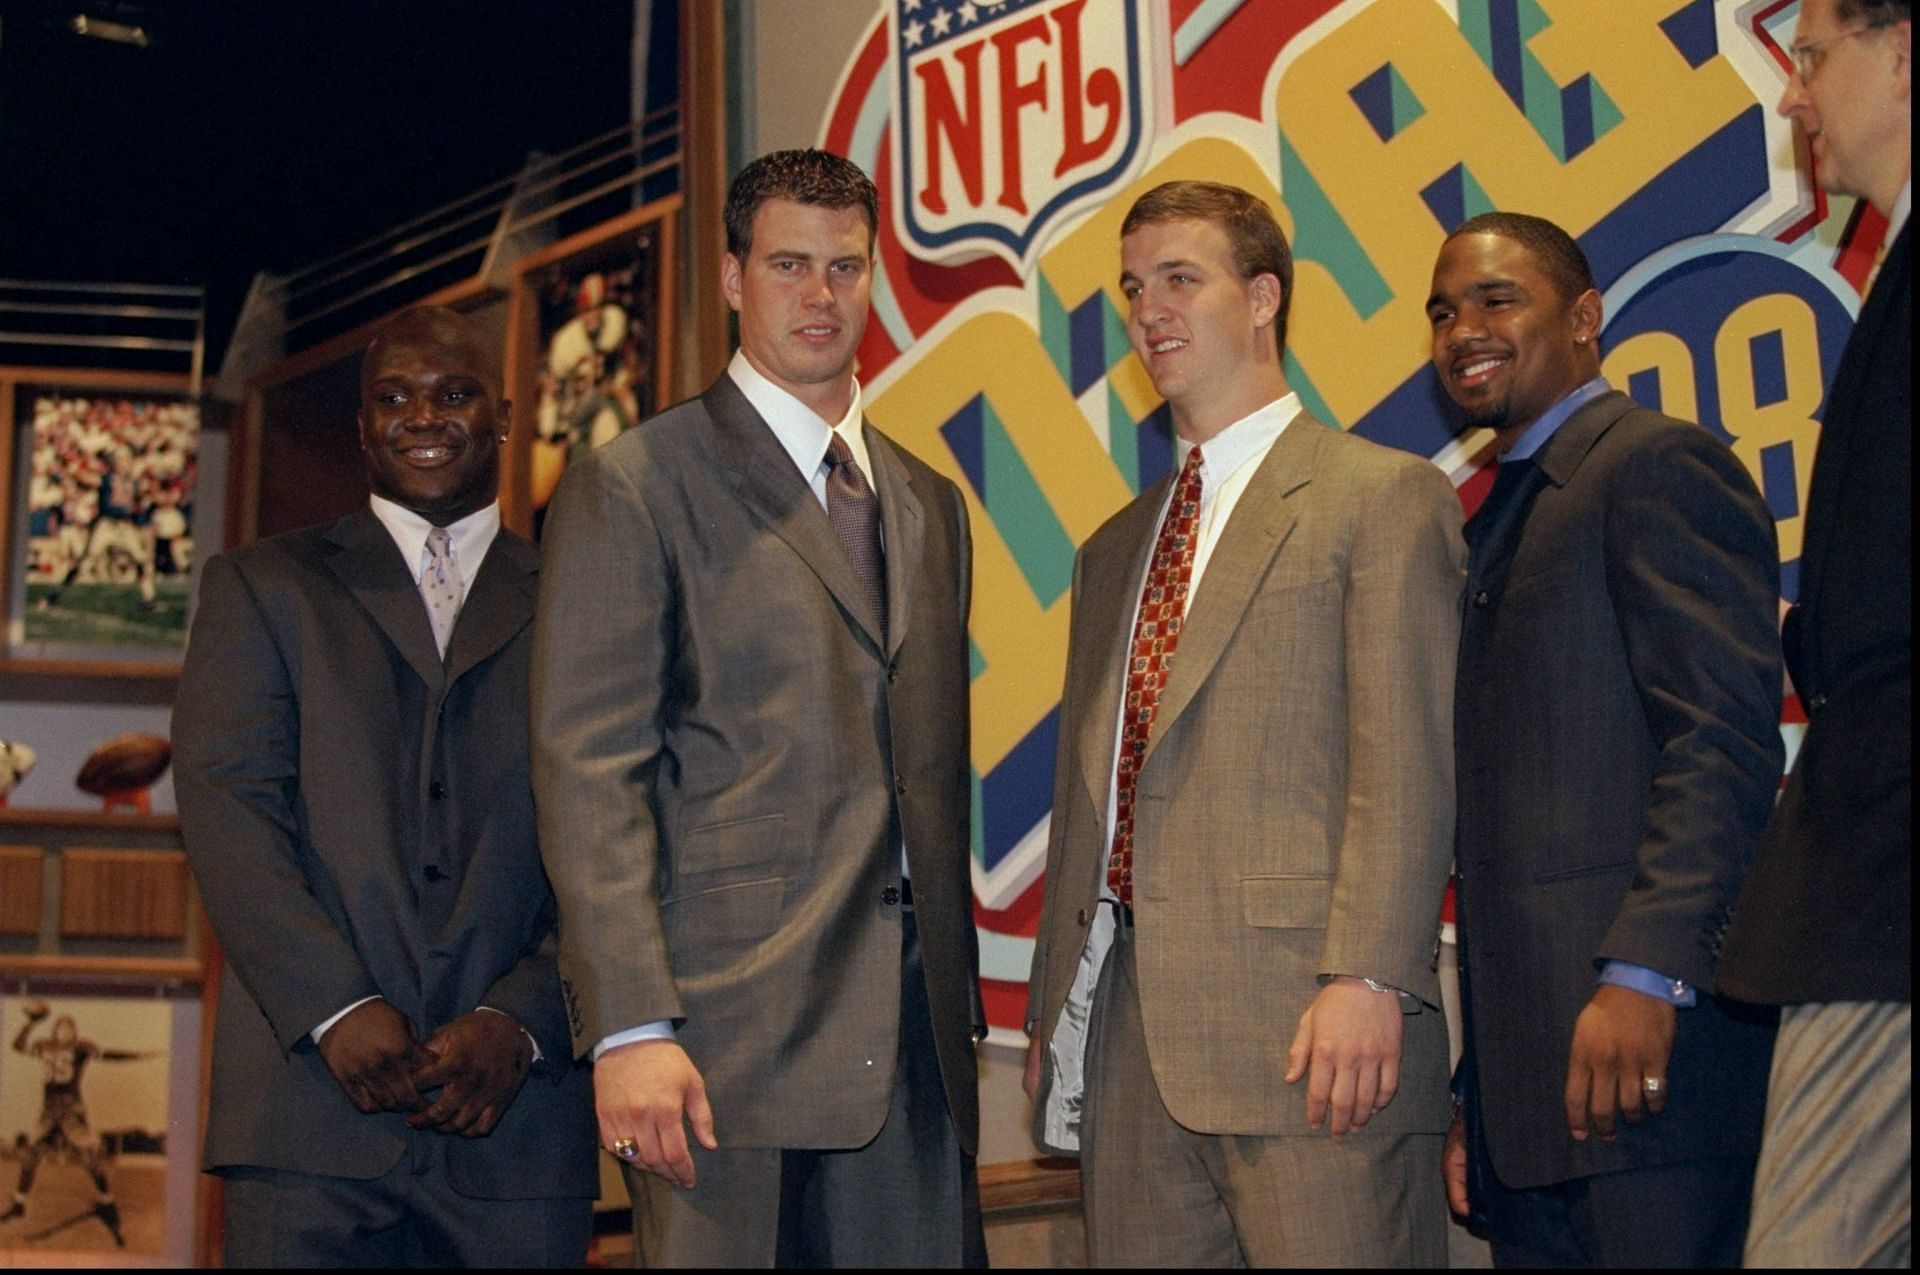 Leaf and The Sheriff at the 1998 NFL Draft